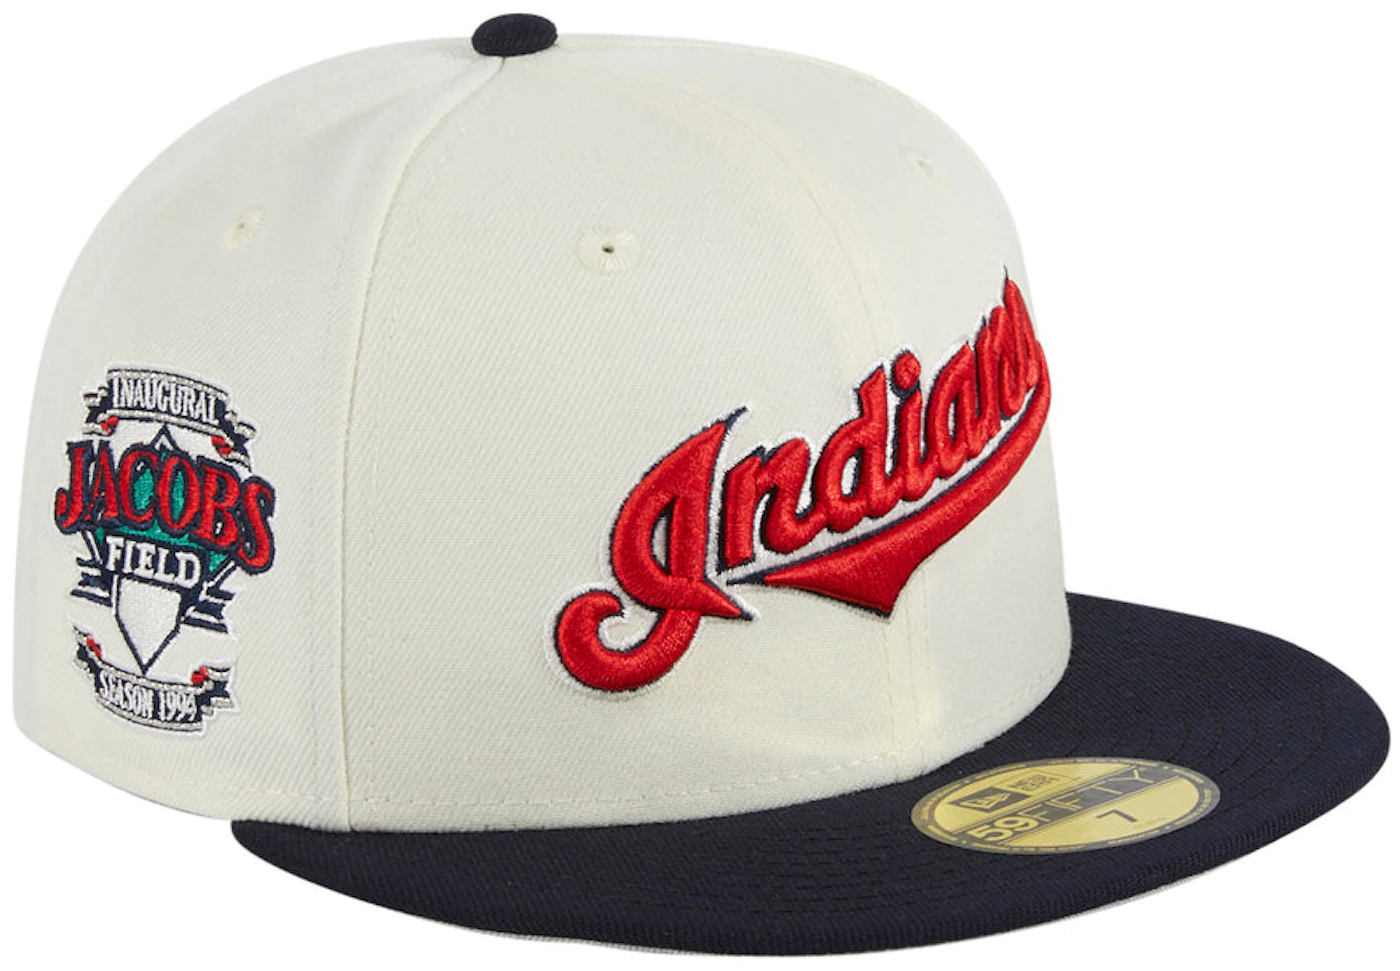 New Era Cleveland Indians Youth Fitted Hat MLB On Field Kids 2 Tone Boys Cap